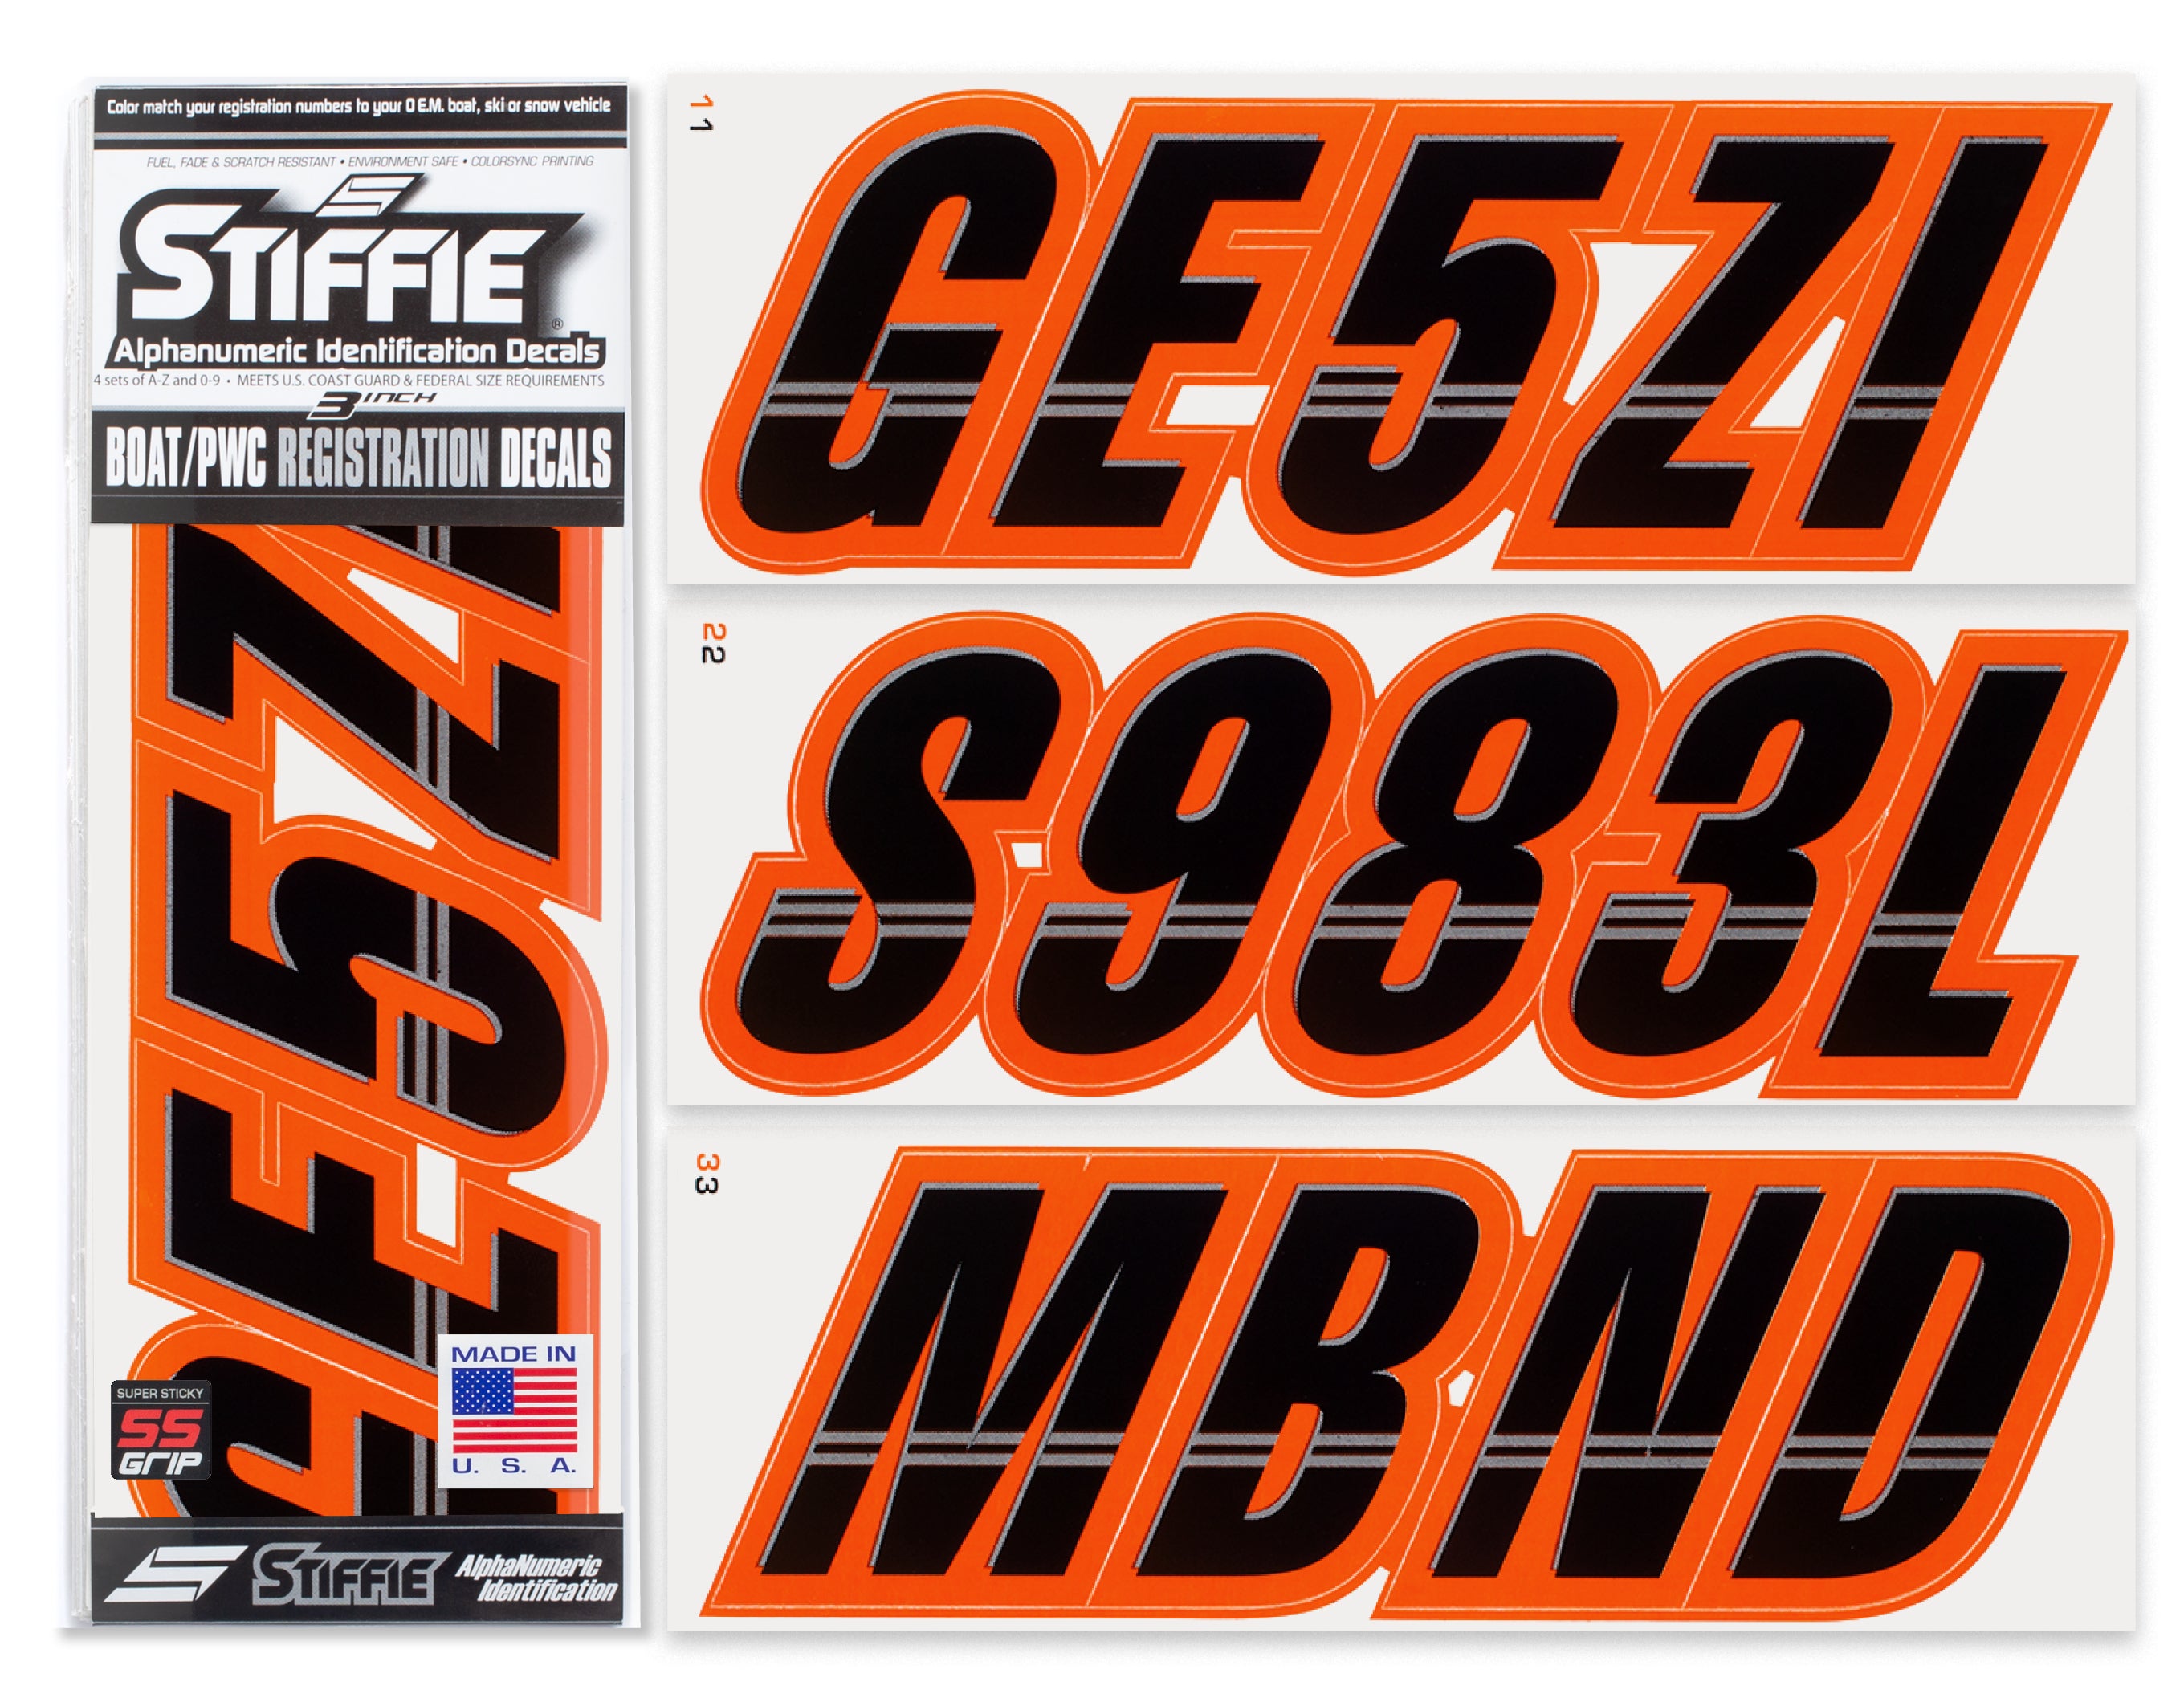 Techtron Black/Orange Super Sticky 3" Alpha Numeric Registration Identification Numbers Stickers Decals for Sea-Doo Spark, Inflatable Boats, Ribs, Hypalon/PVC, PWC and Boats